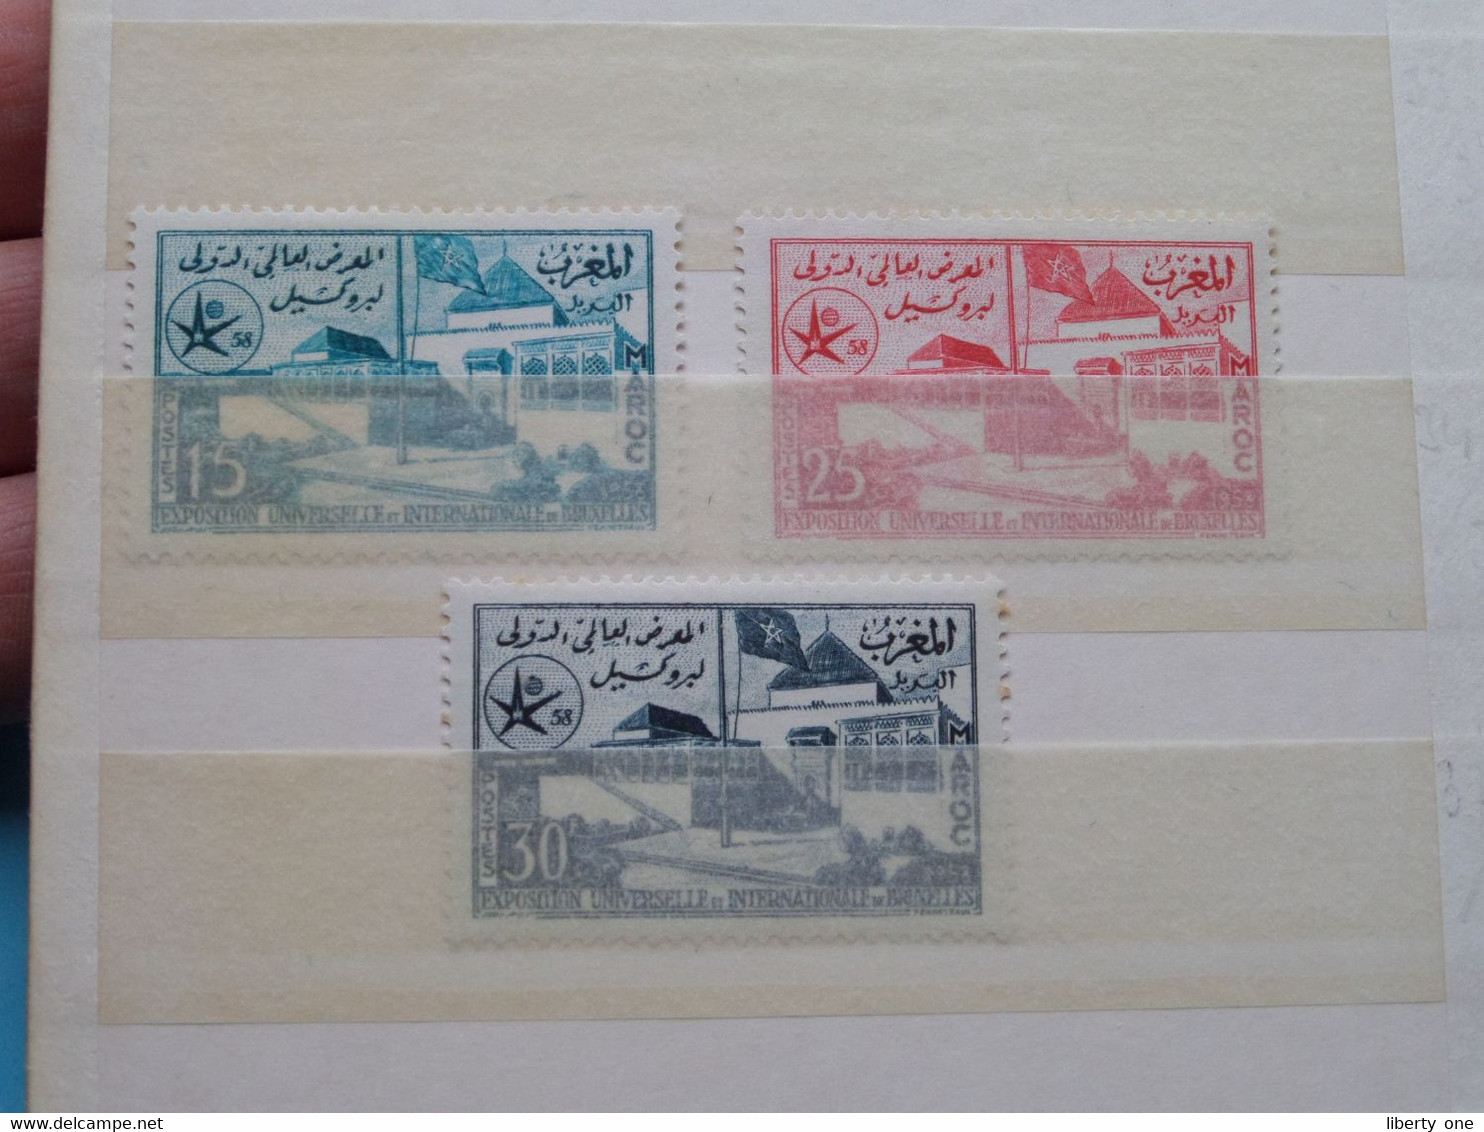 EXPOSITION De BRUXELLES >>> 3 Timbres / Stamps MAROC / Expo Mundial > 1958 Brussels ) See Photo ! - 1958 – Bruselas (Bélgica)